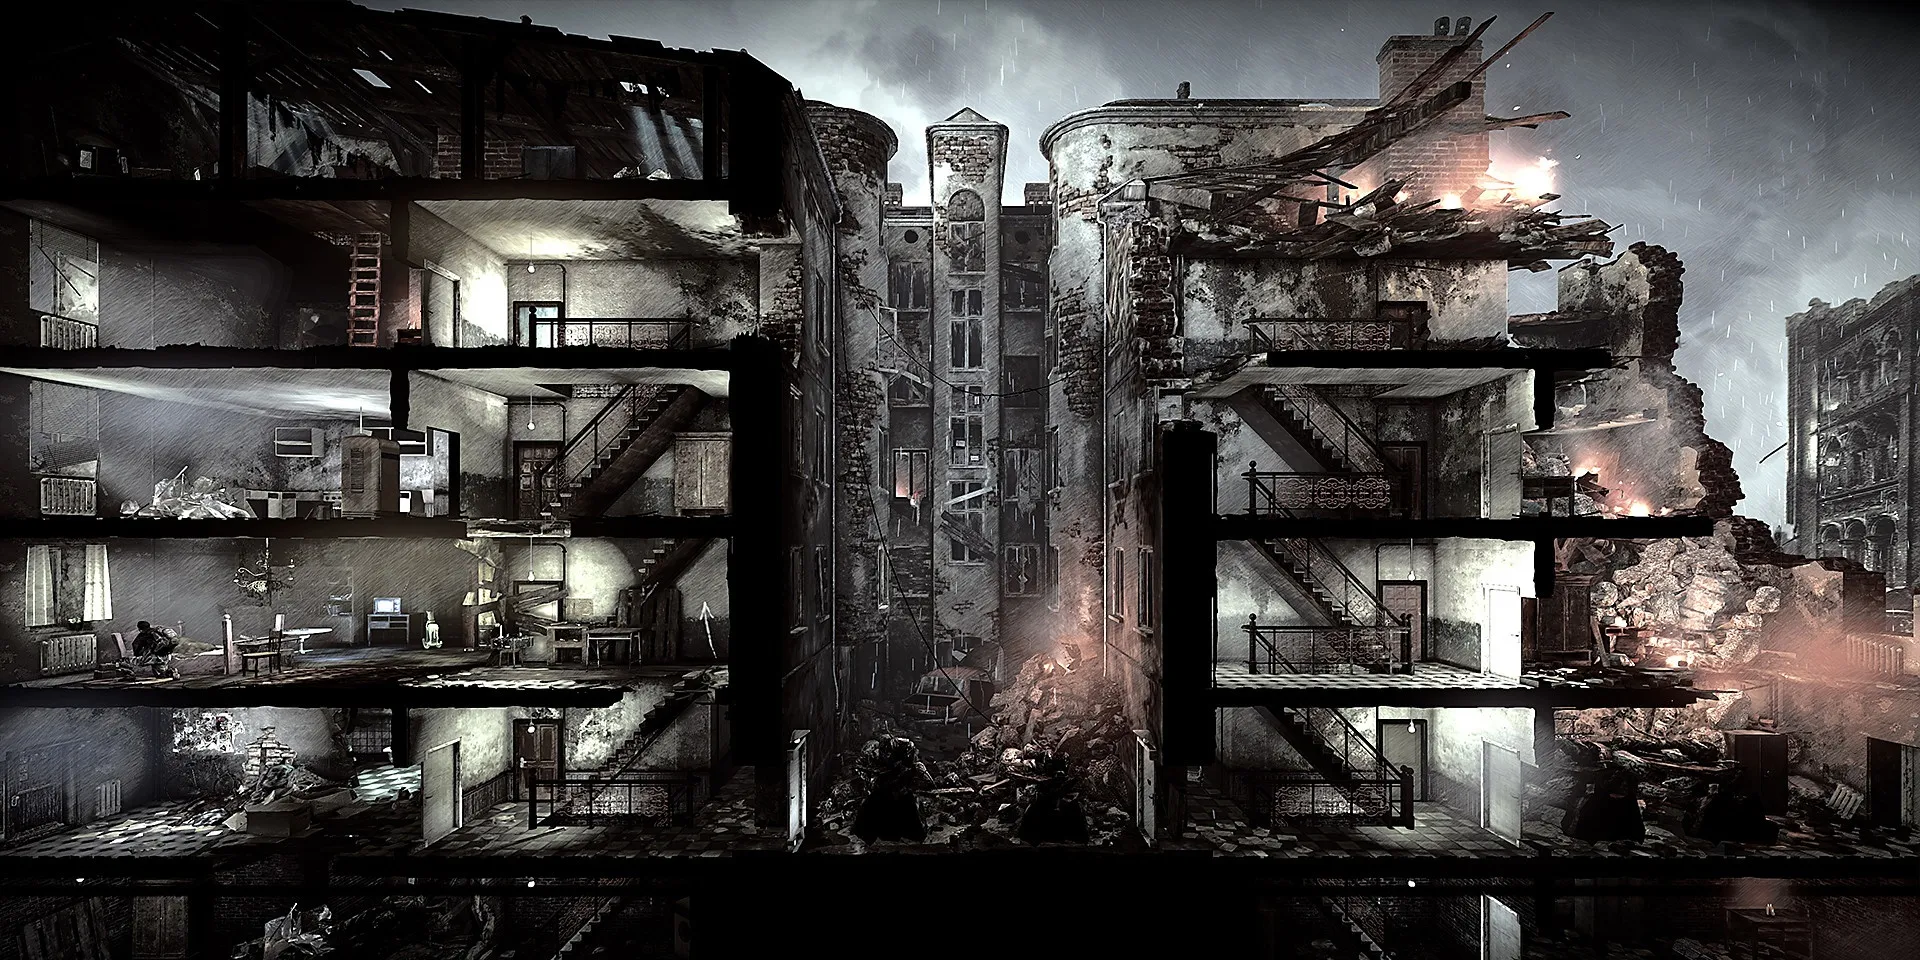 Shelters collapsing in wartime conditions in This War of Mine